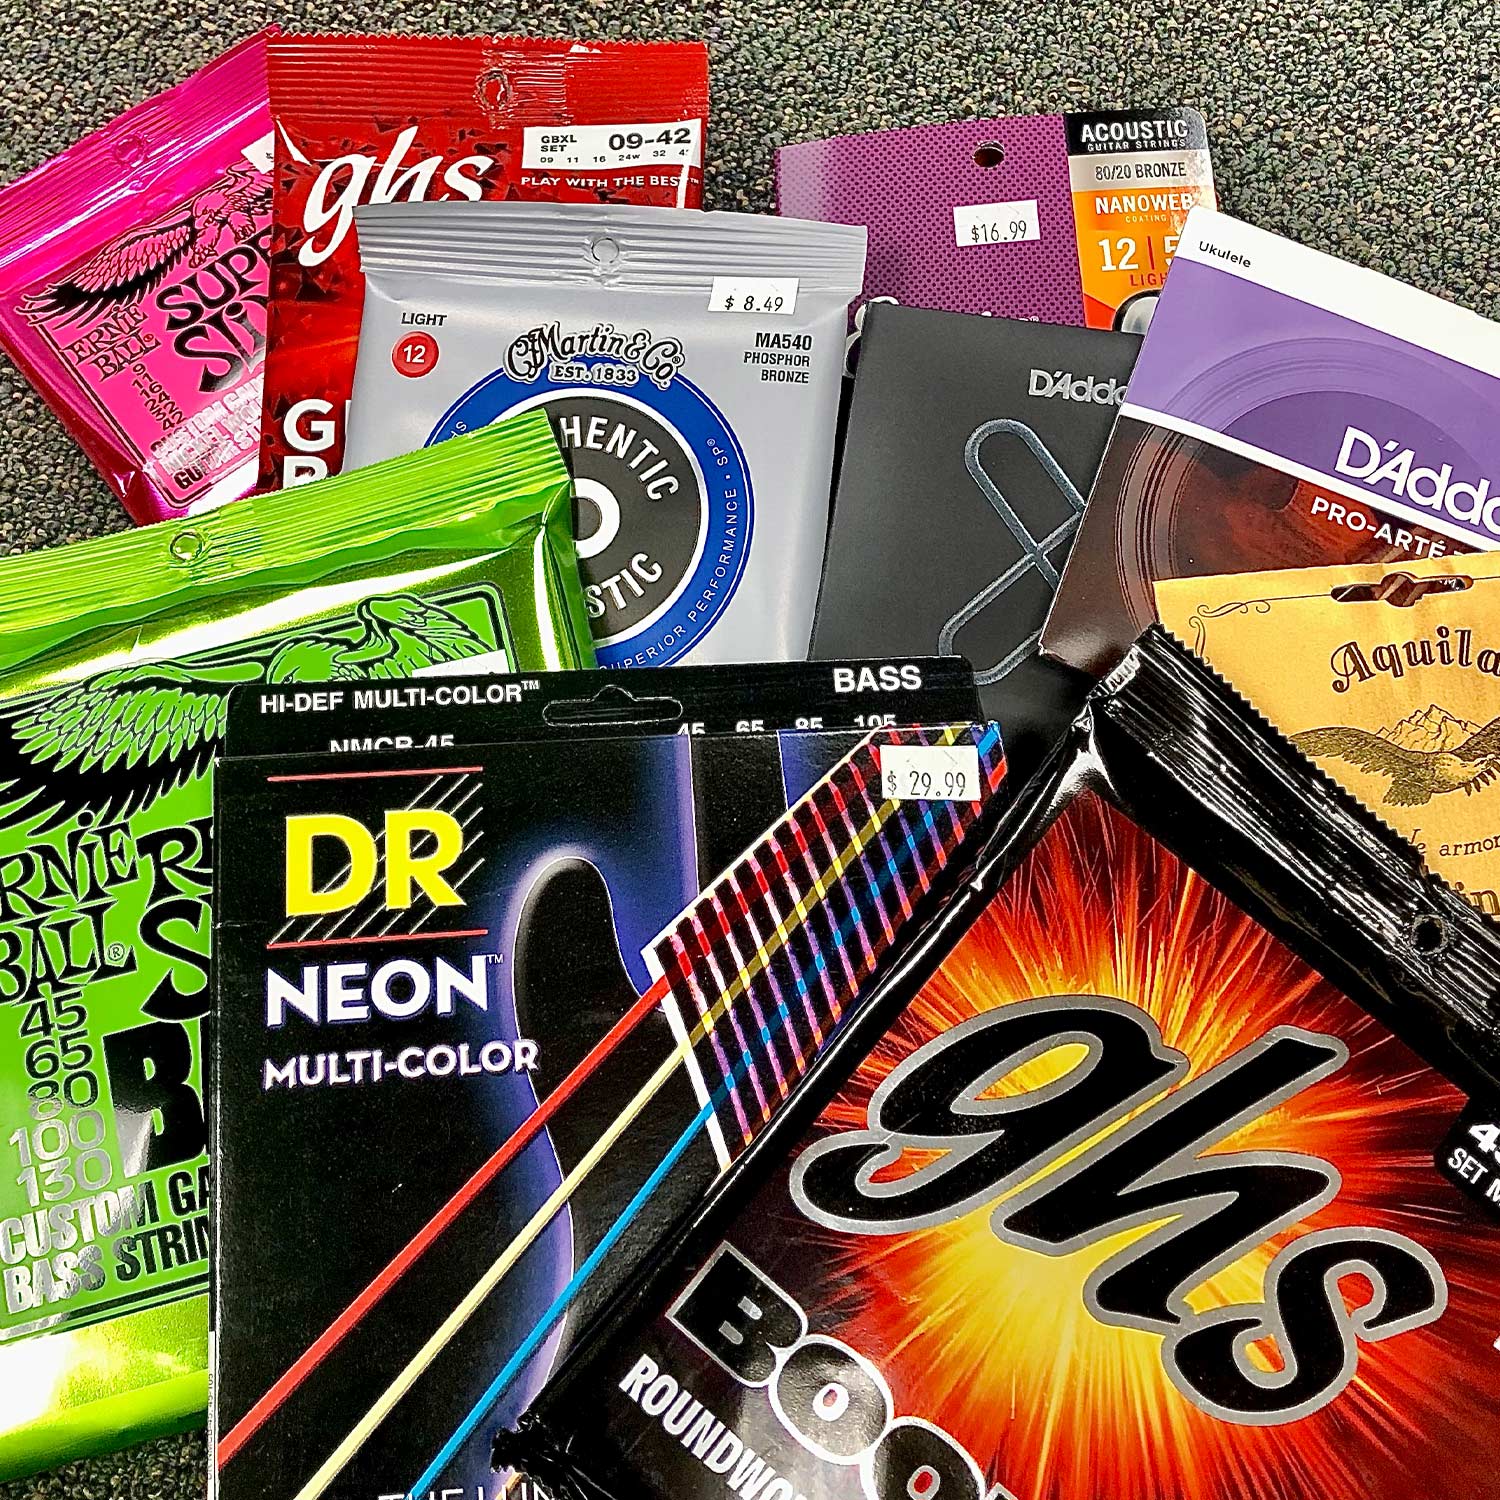 image of guitar accessories for sale from WestSide Music